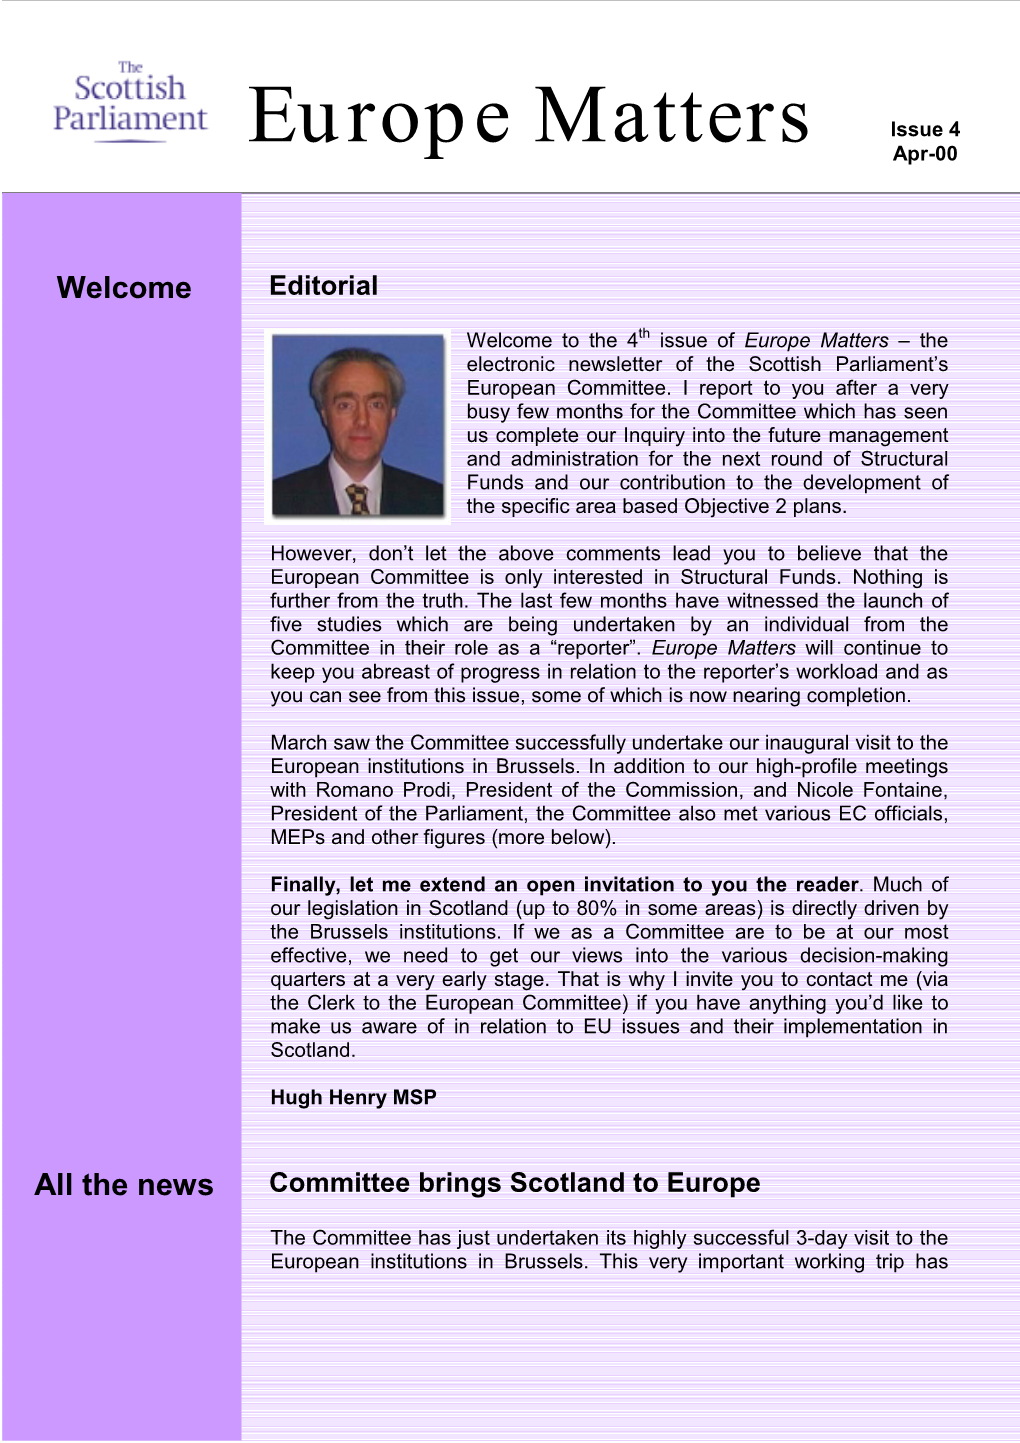 Europe Matters Issue 4 Apr-00